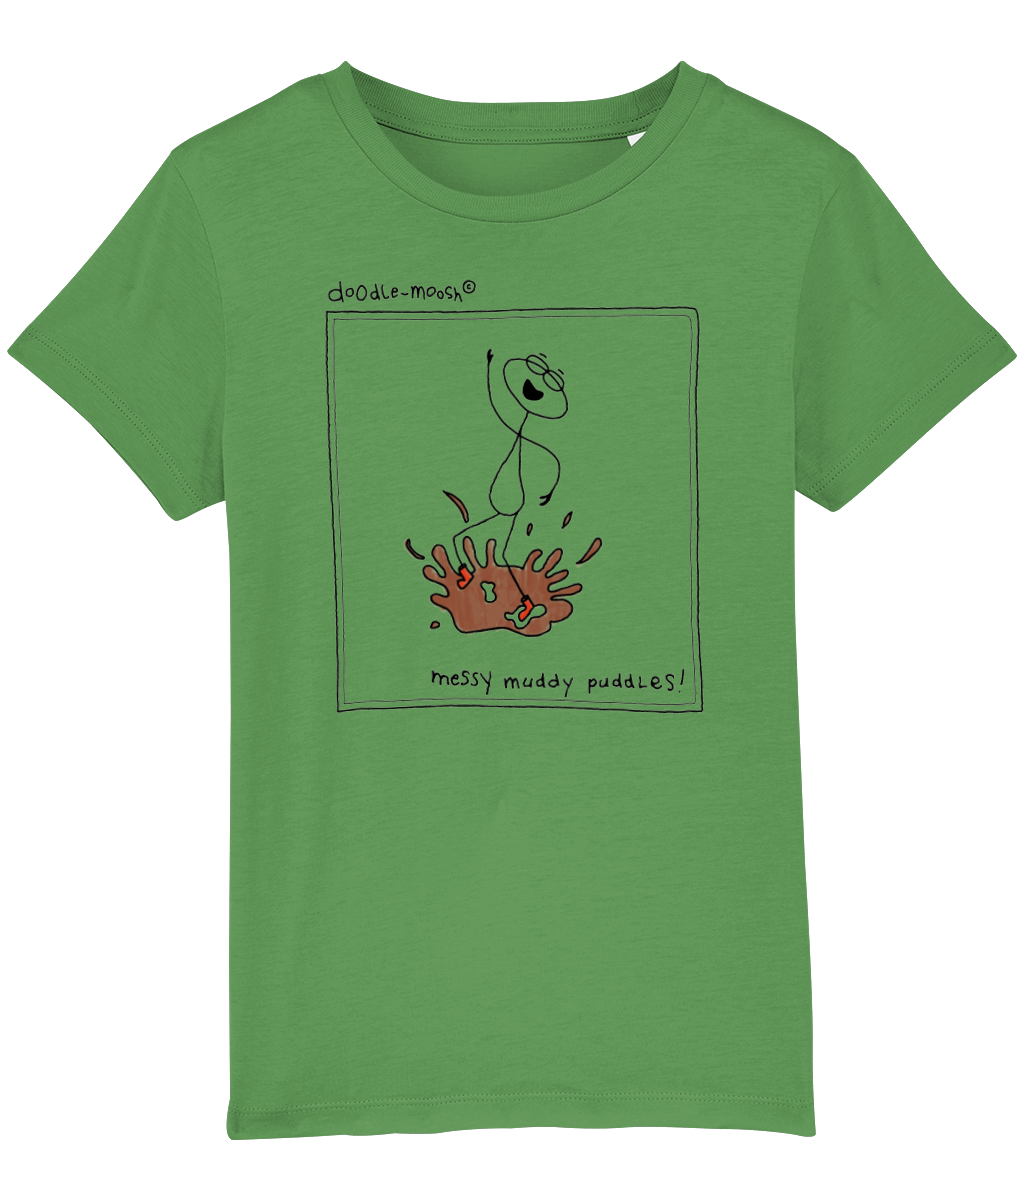 Messy muddy puddles t-shirt, green with black, colourful drawings